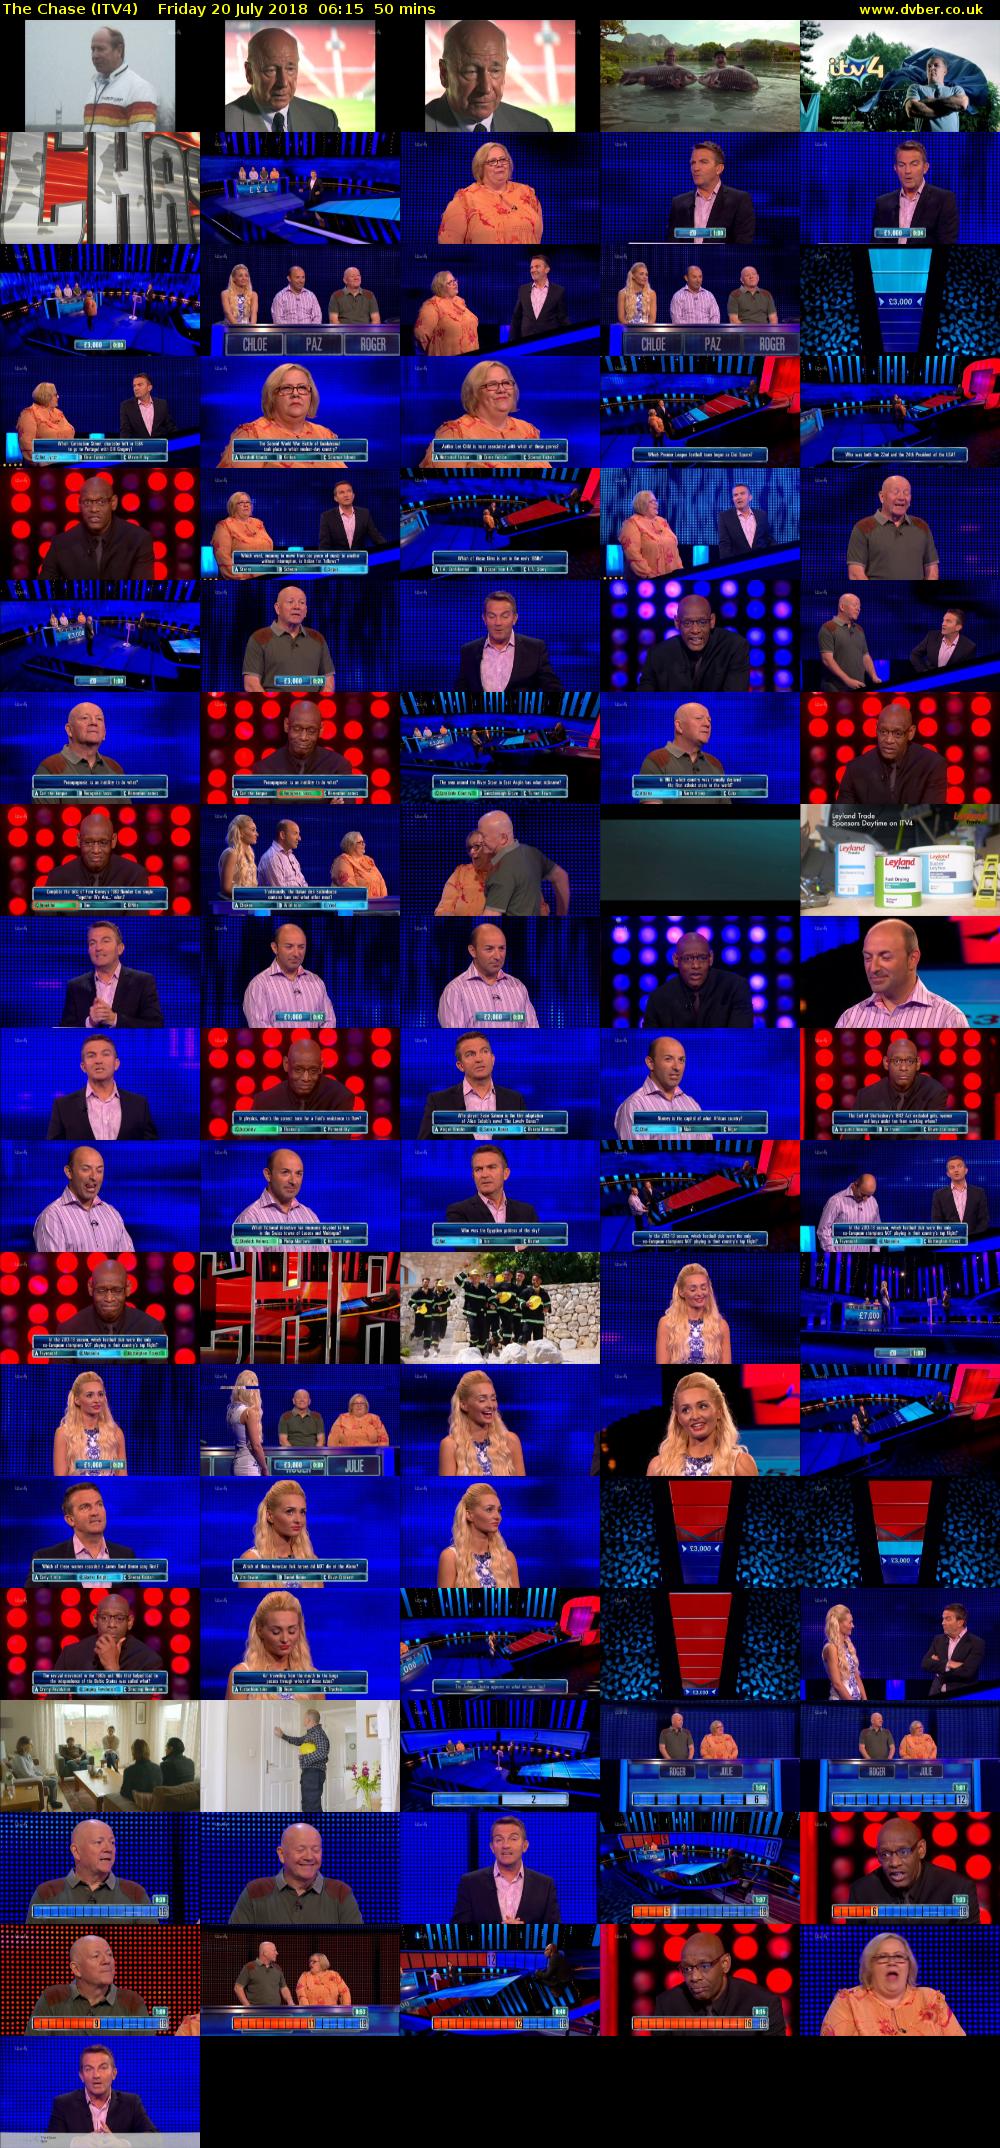 The Chase (ITV4) Friday 20 July 2018 06:15 - 07:05